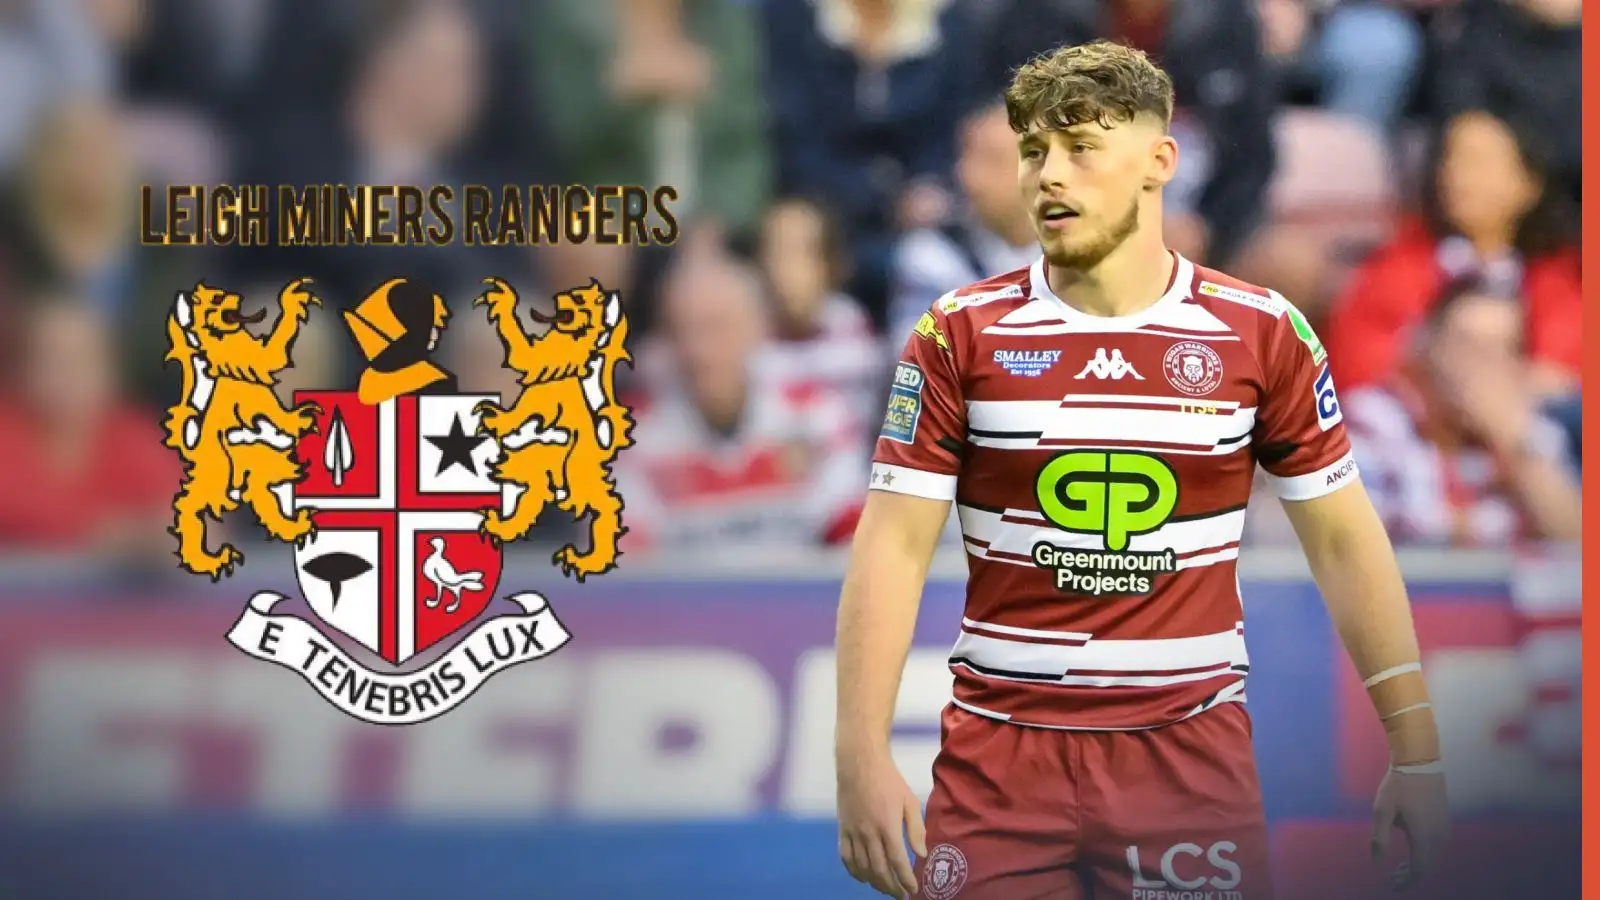 Wigan Warriors starlet Jack Farrimond’s pledge to his community club Leigh Miners Rangers